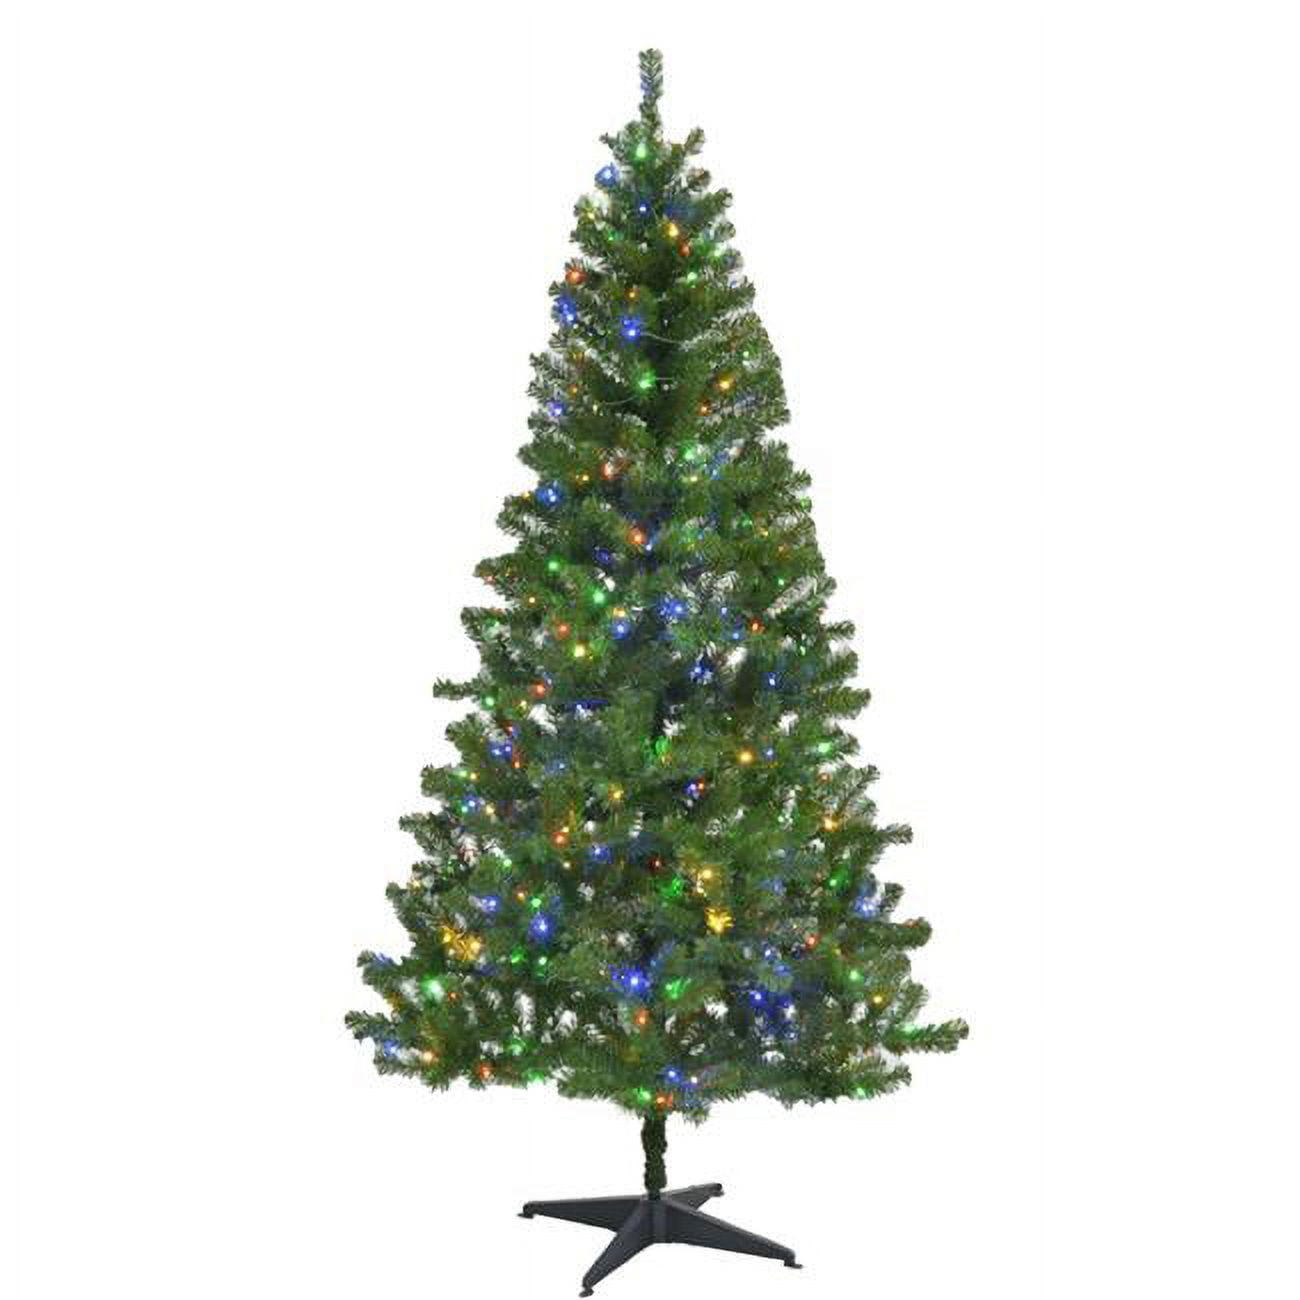 Picture of Celebrations 9070917 7 ft. Slim LED 400 Lights Pine Christmas Tree